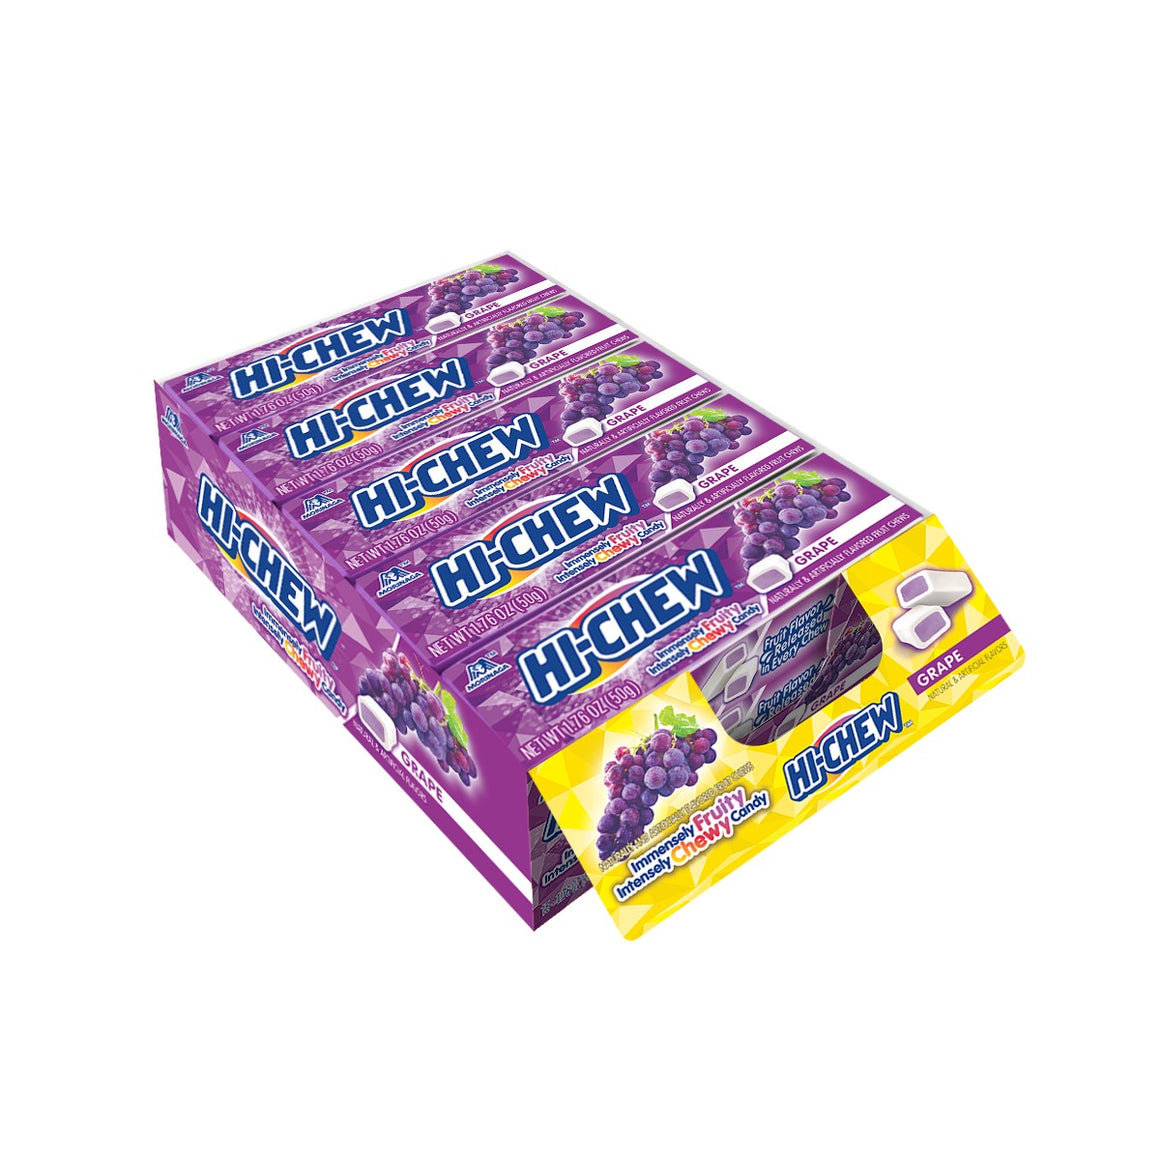 All City Candy Hi-Chew Grape Fruit Chews - 1.76-oz. Bar Chewy Morinaga & Company 1 Bar For fresh candy and great service, visit www.allcitycandy.com